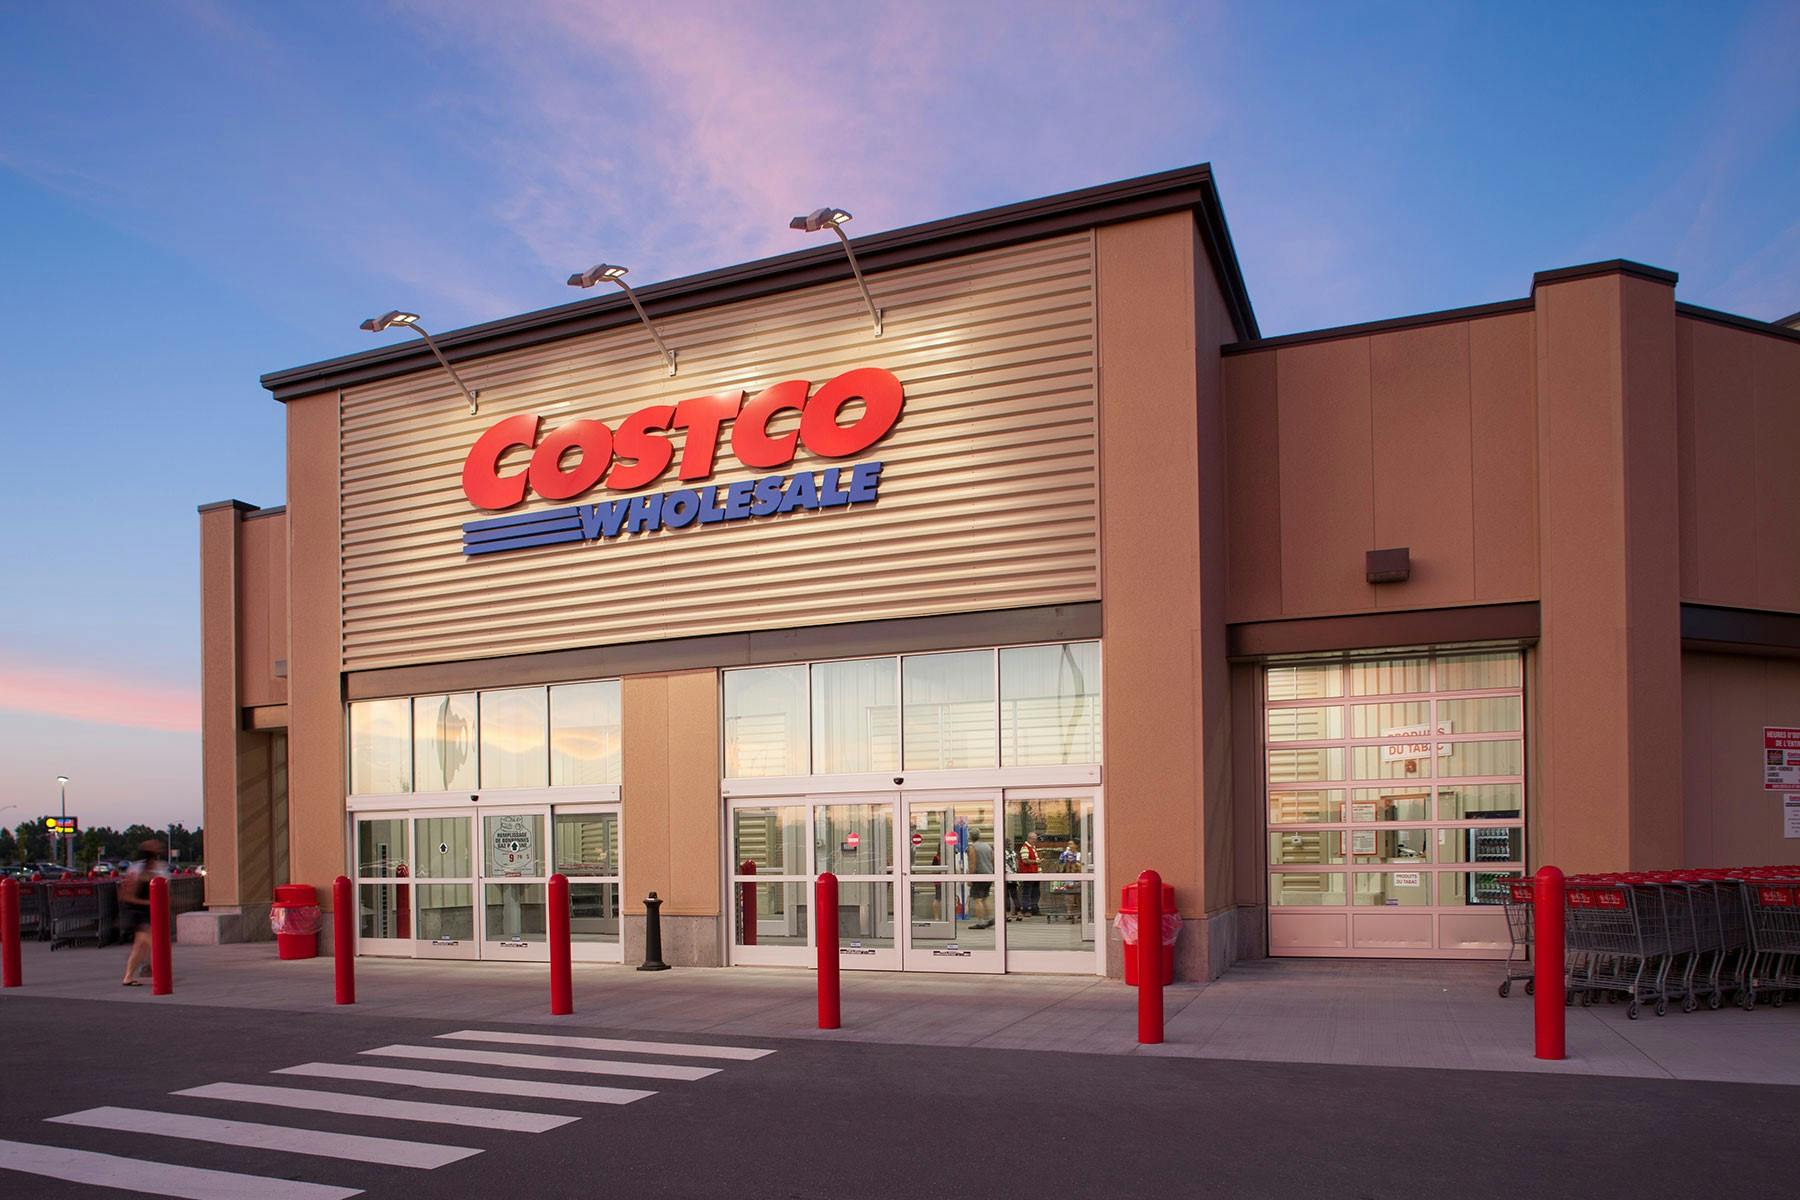 Costco Human Resources: What You Need To Know